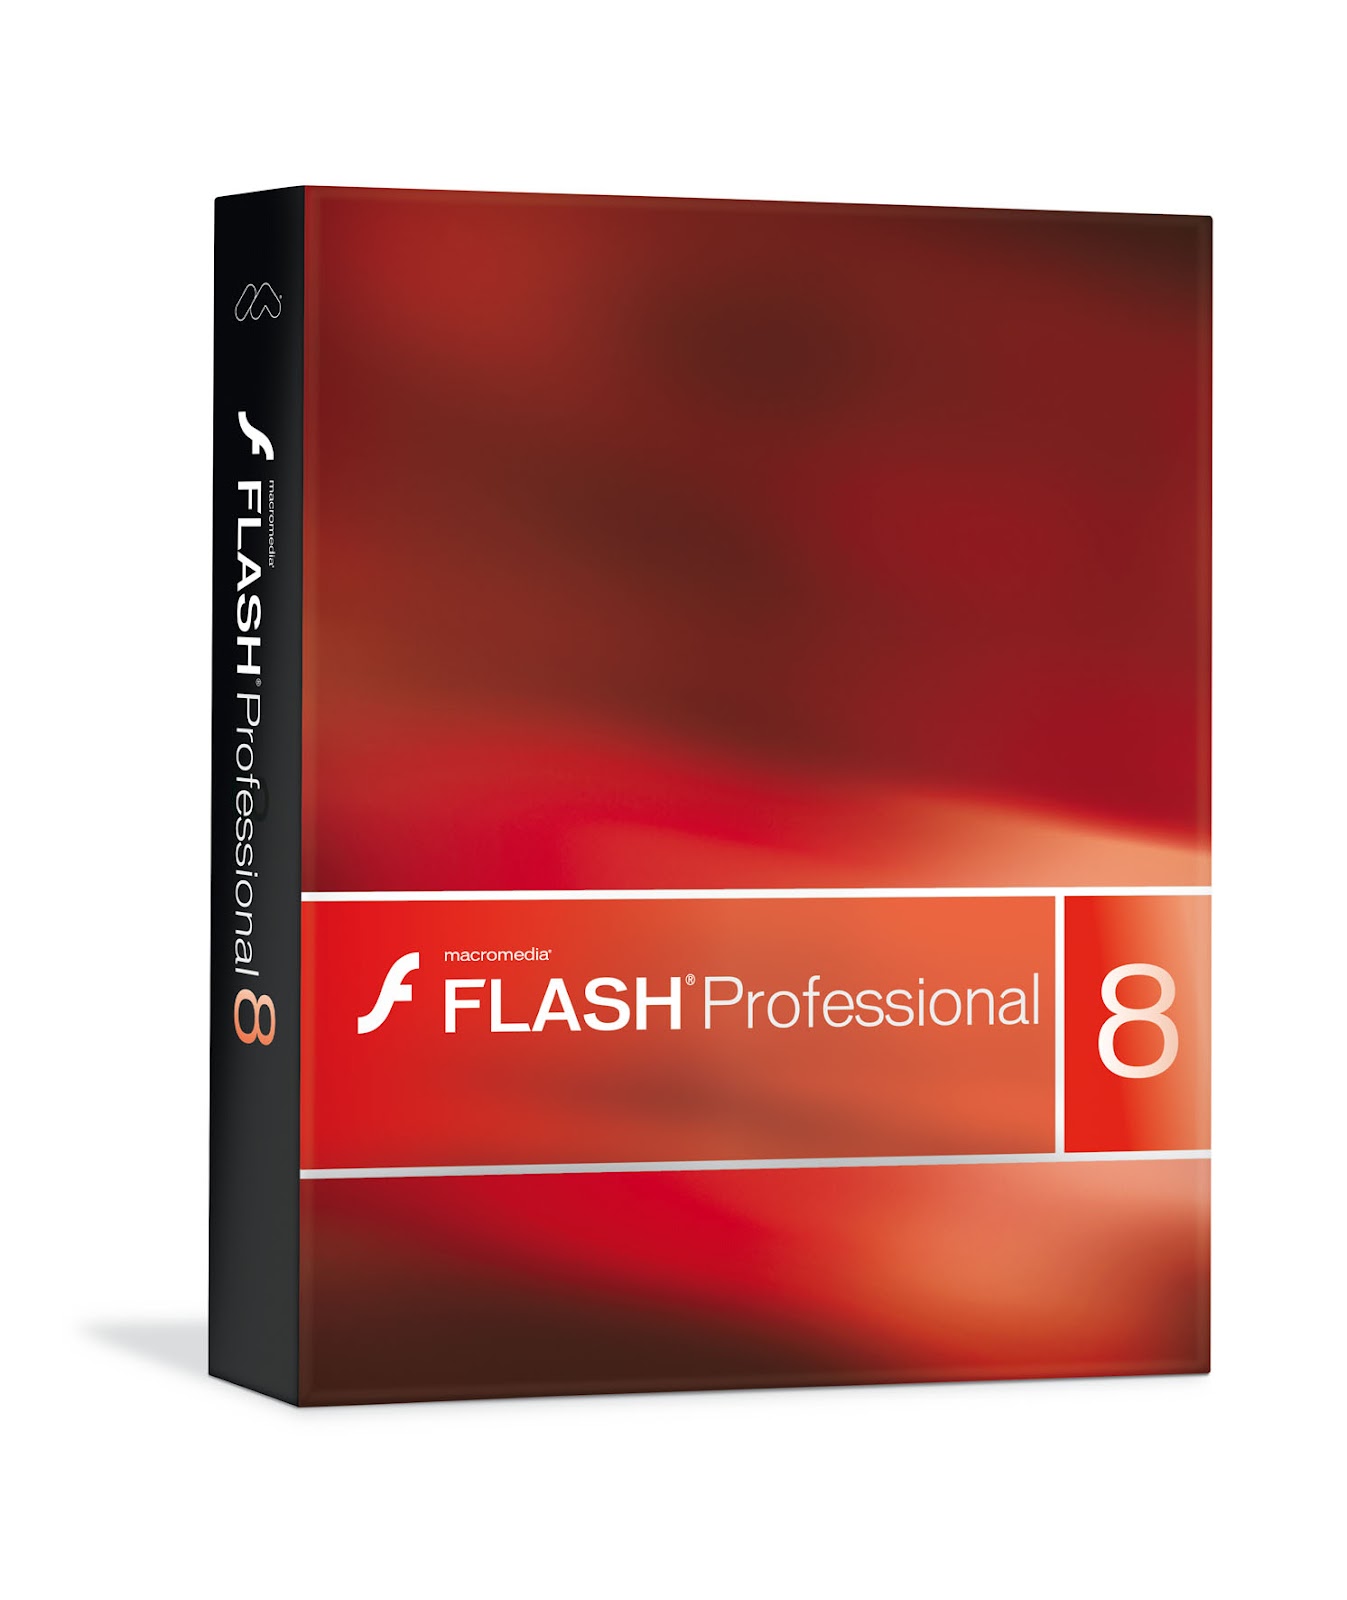 adobe flash professional 8 free download for windows 7